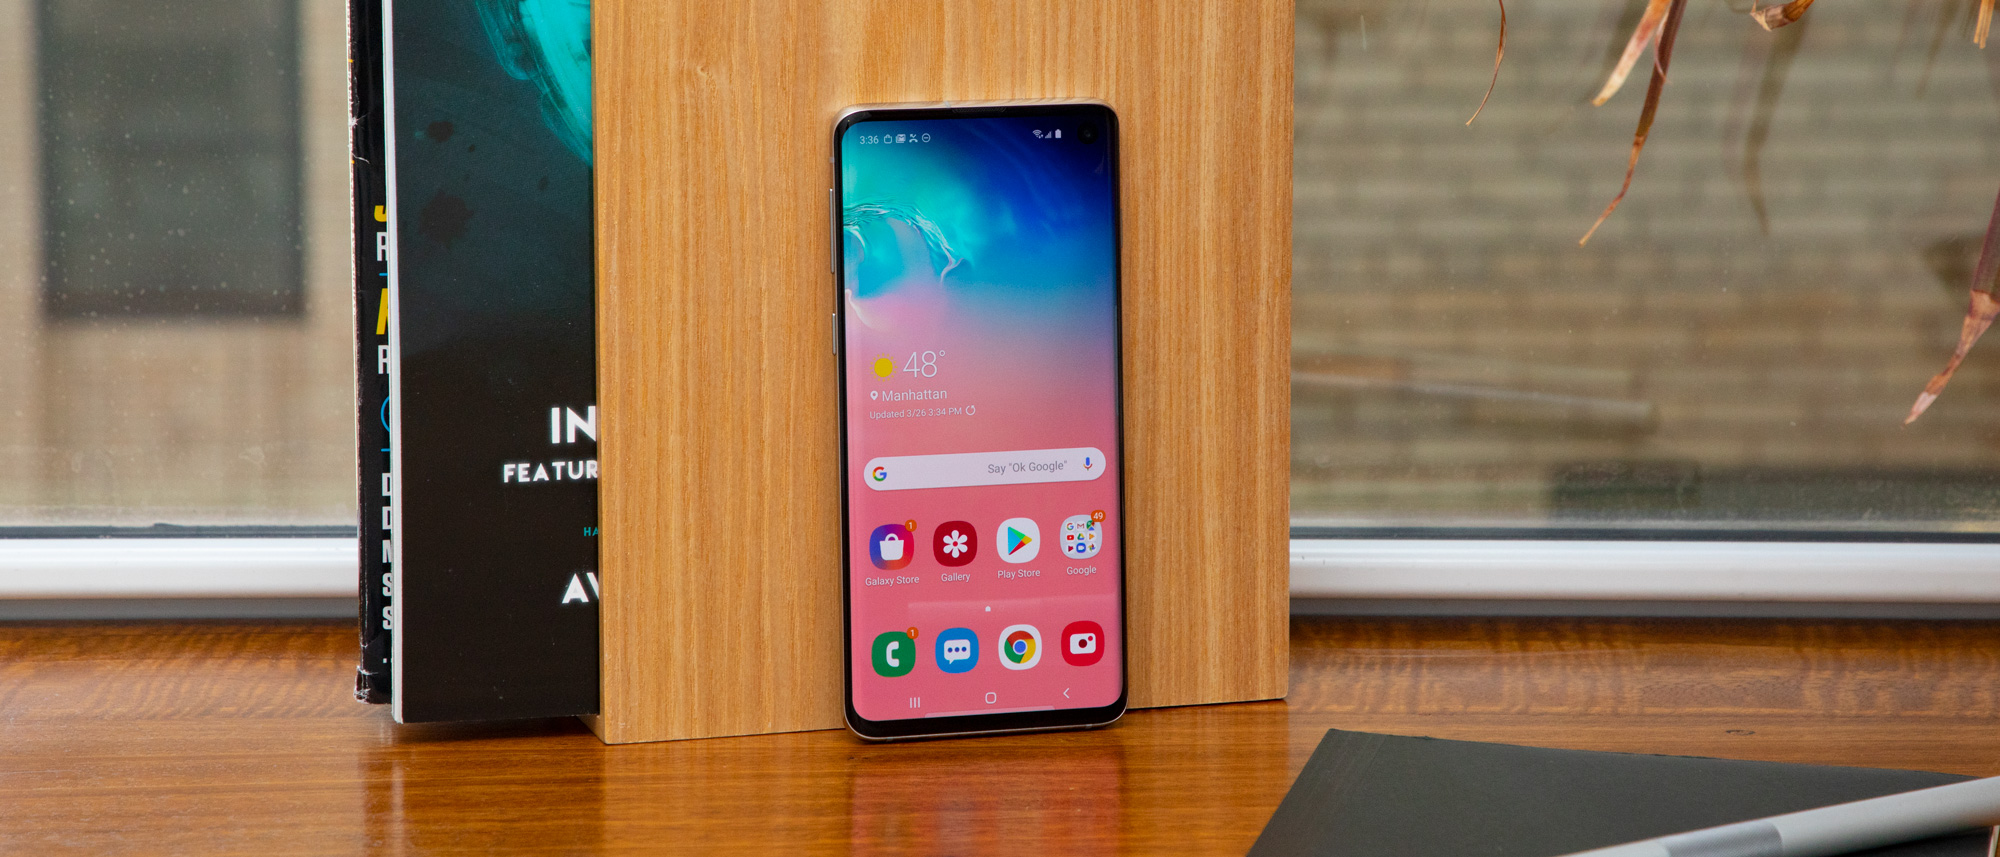 Samsung Galaxy S10 announced: price, hands-on, and release date